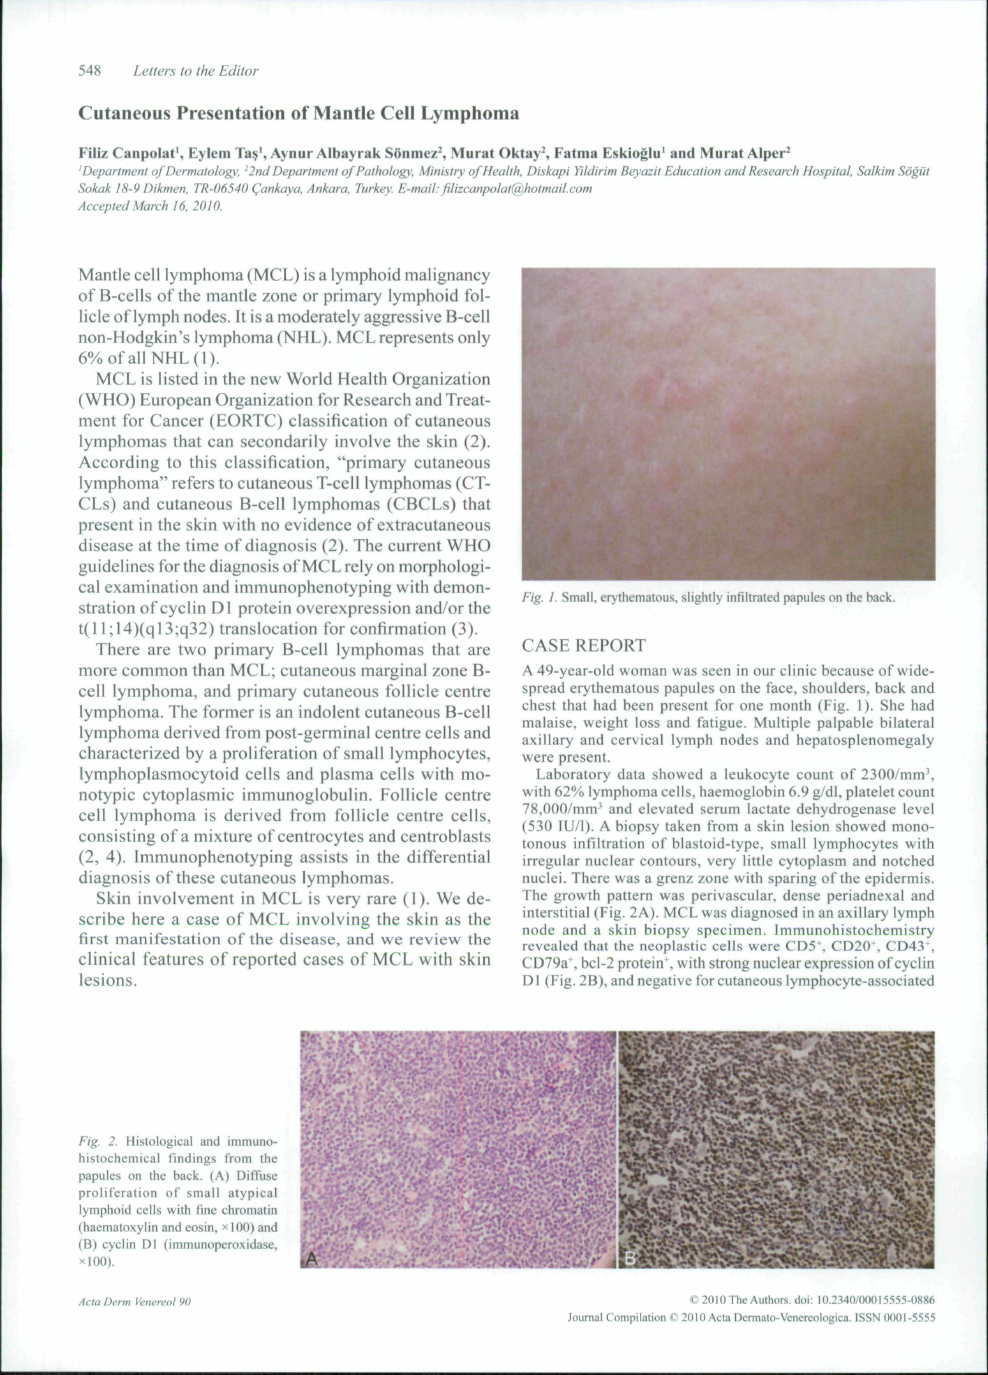 Cutaneous Presentation Of Mantle Cell Lymphoma Topic Of Research Paper In Clinical Medicine Download Scholarly Article Pdf And Read For Free On Cyberleninka Open Science Hub